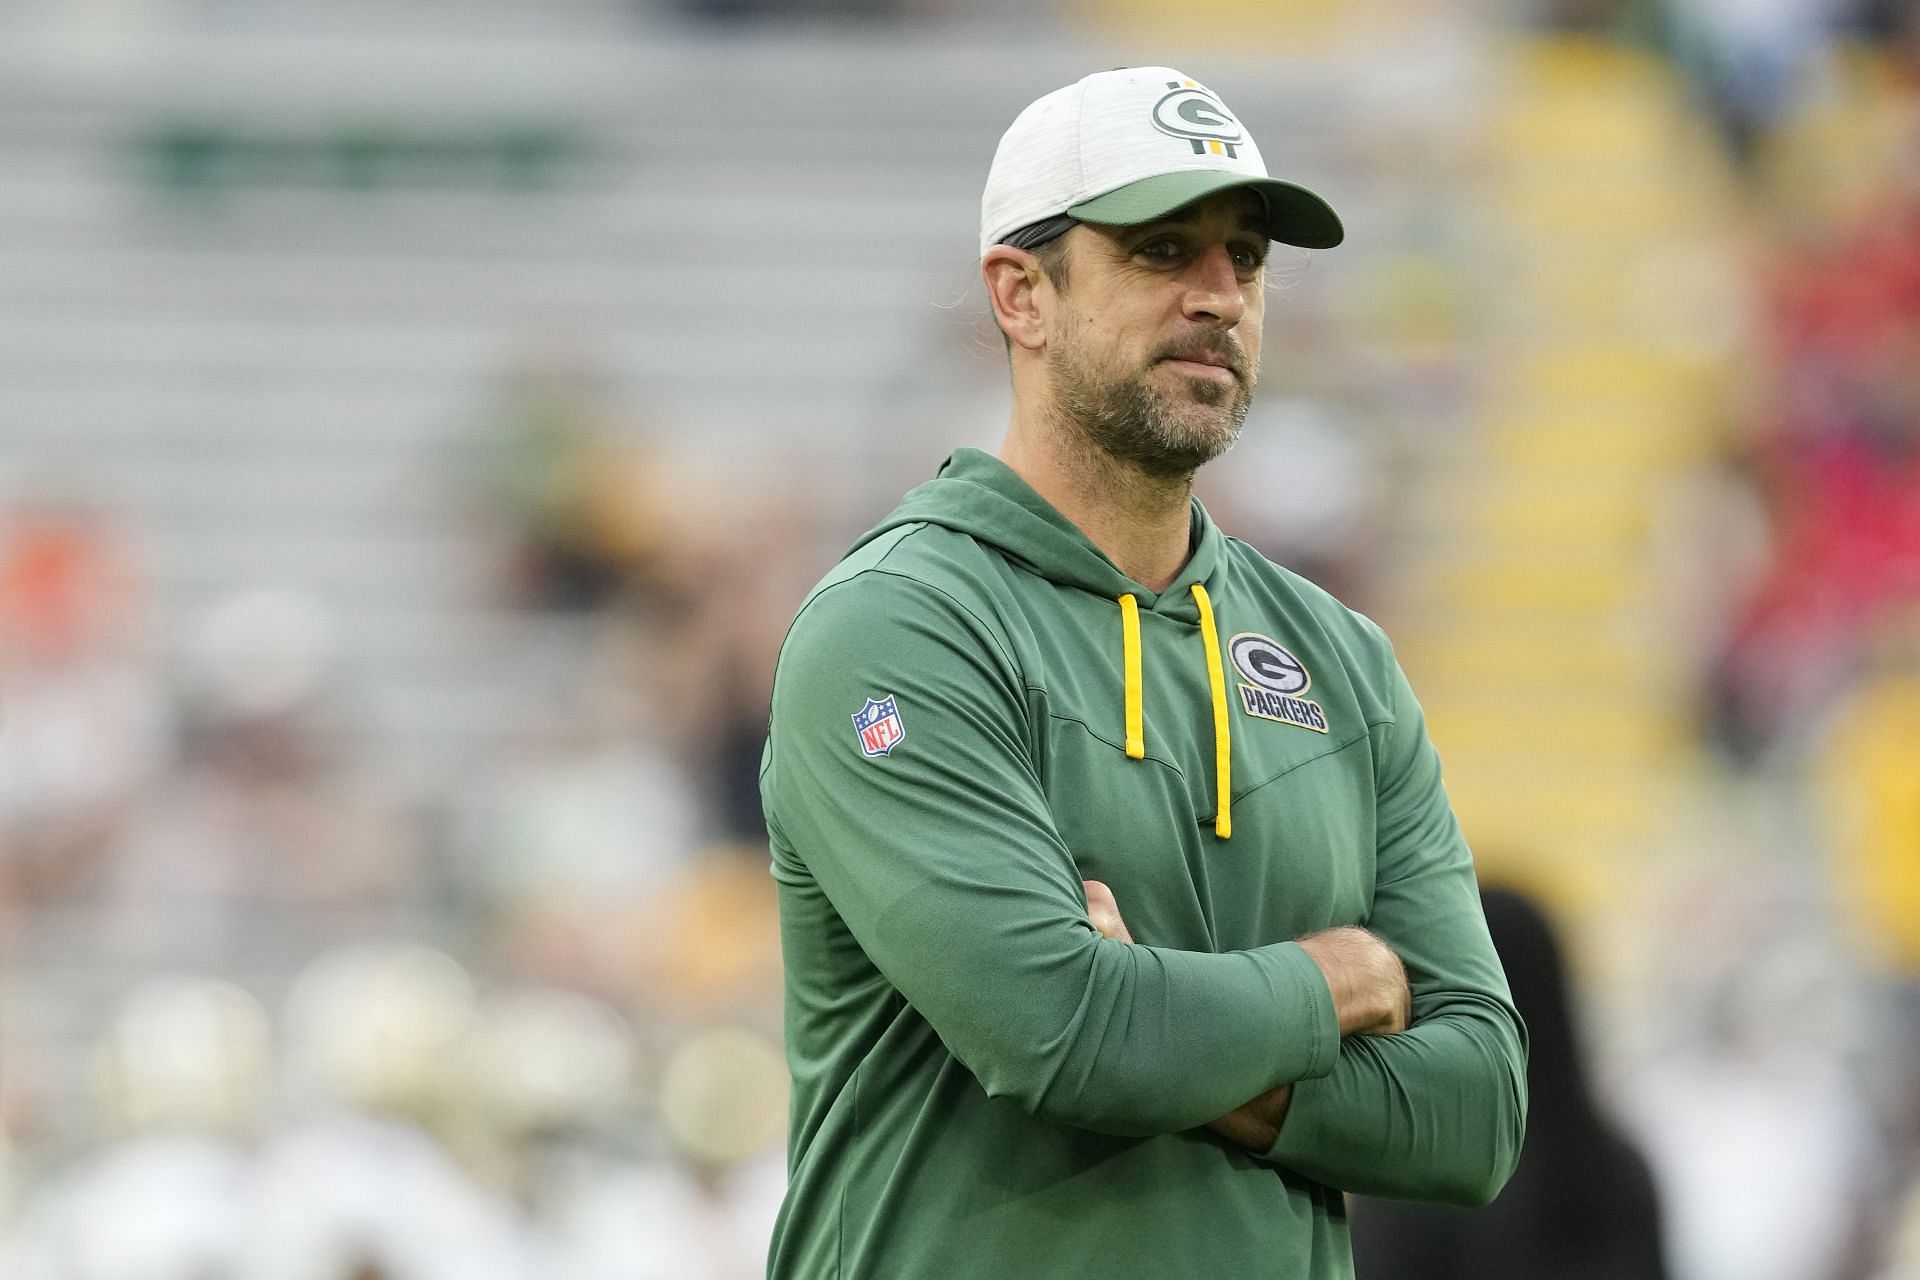 NFL Top 100 - Aaron Rodgers of the Green Bay Packers